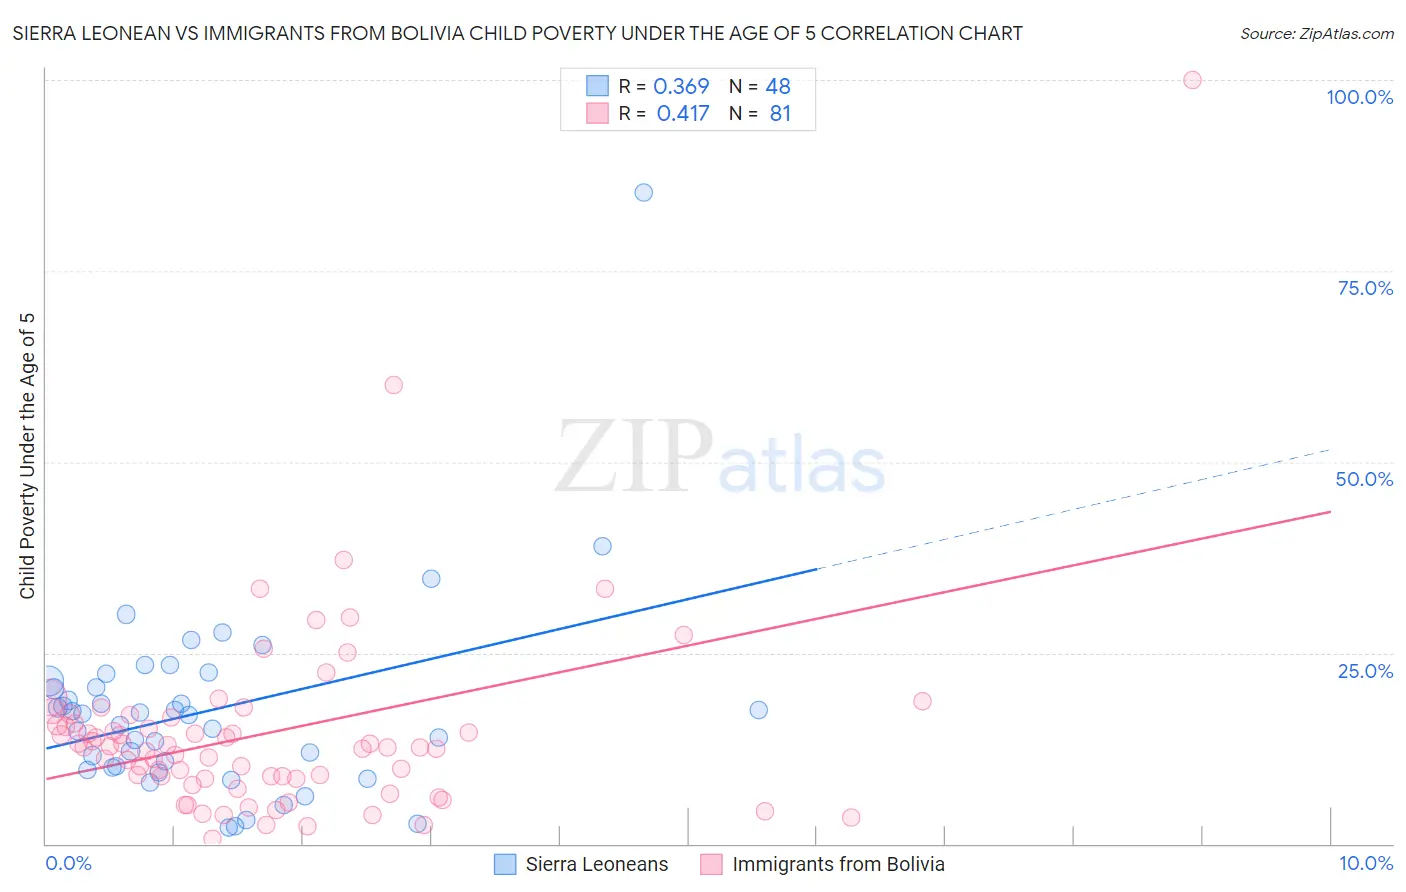 Sierra Leonean vs Immigrants from Bolivia Child Poverty Under the Age of 5